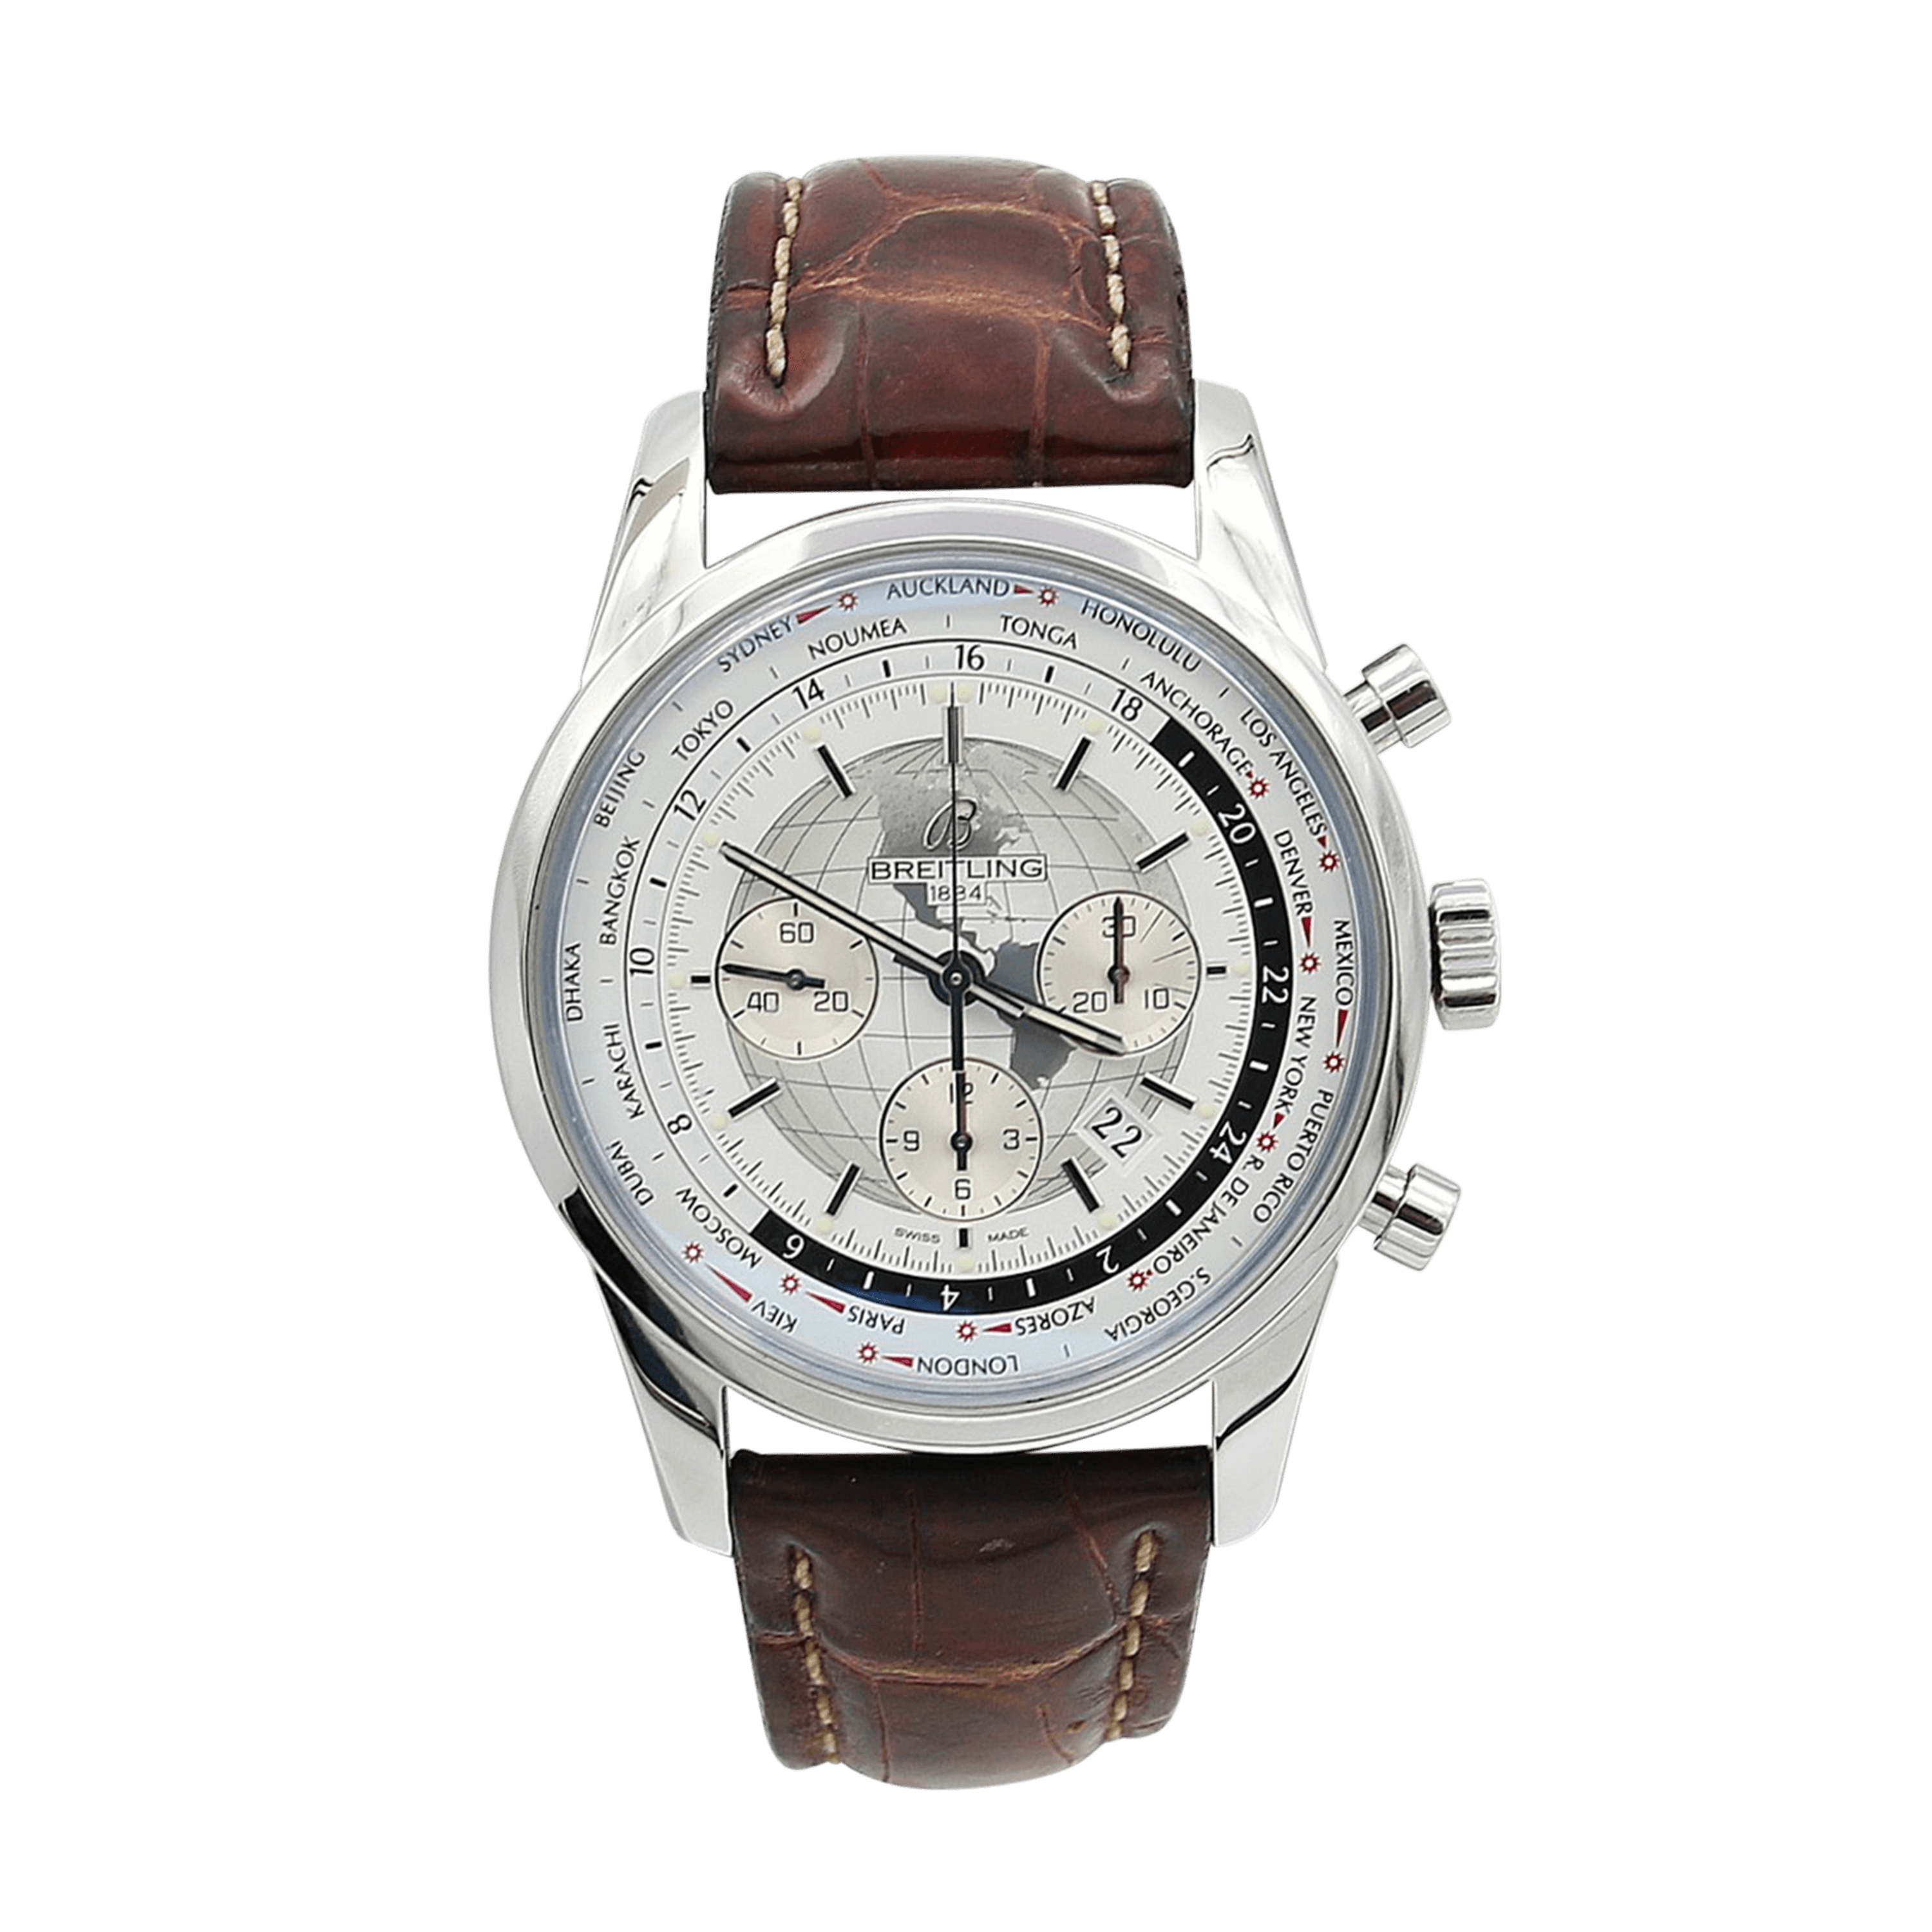 Breitling Transocean Chronograph Unitime ref. AB0510 - Leather Strap